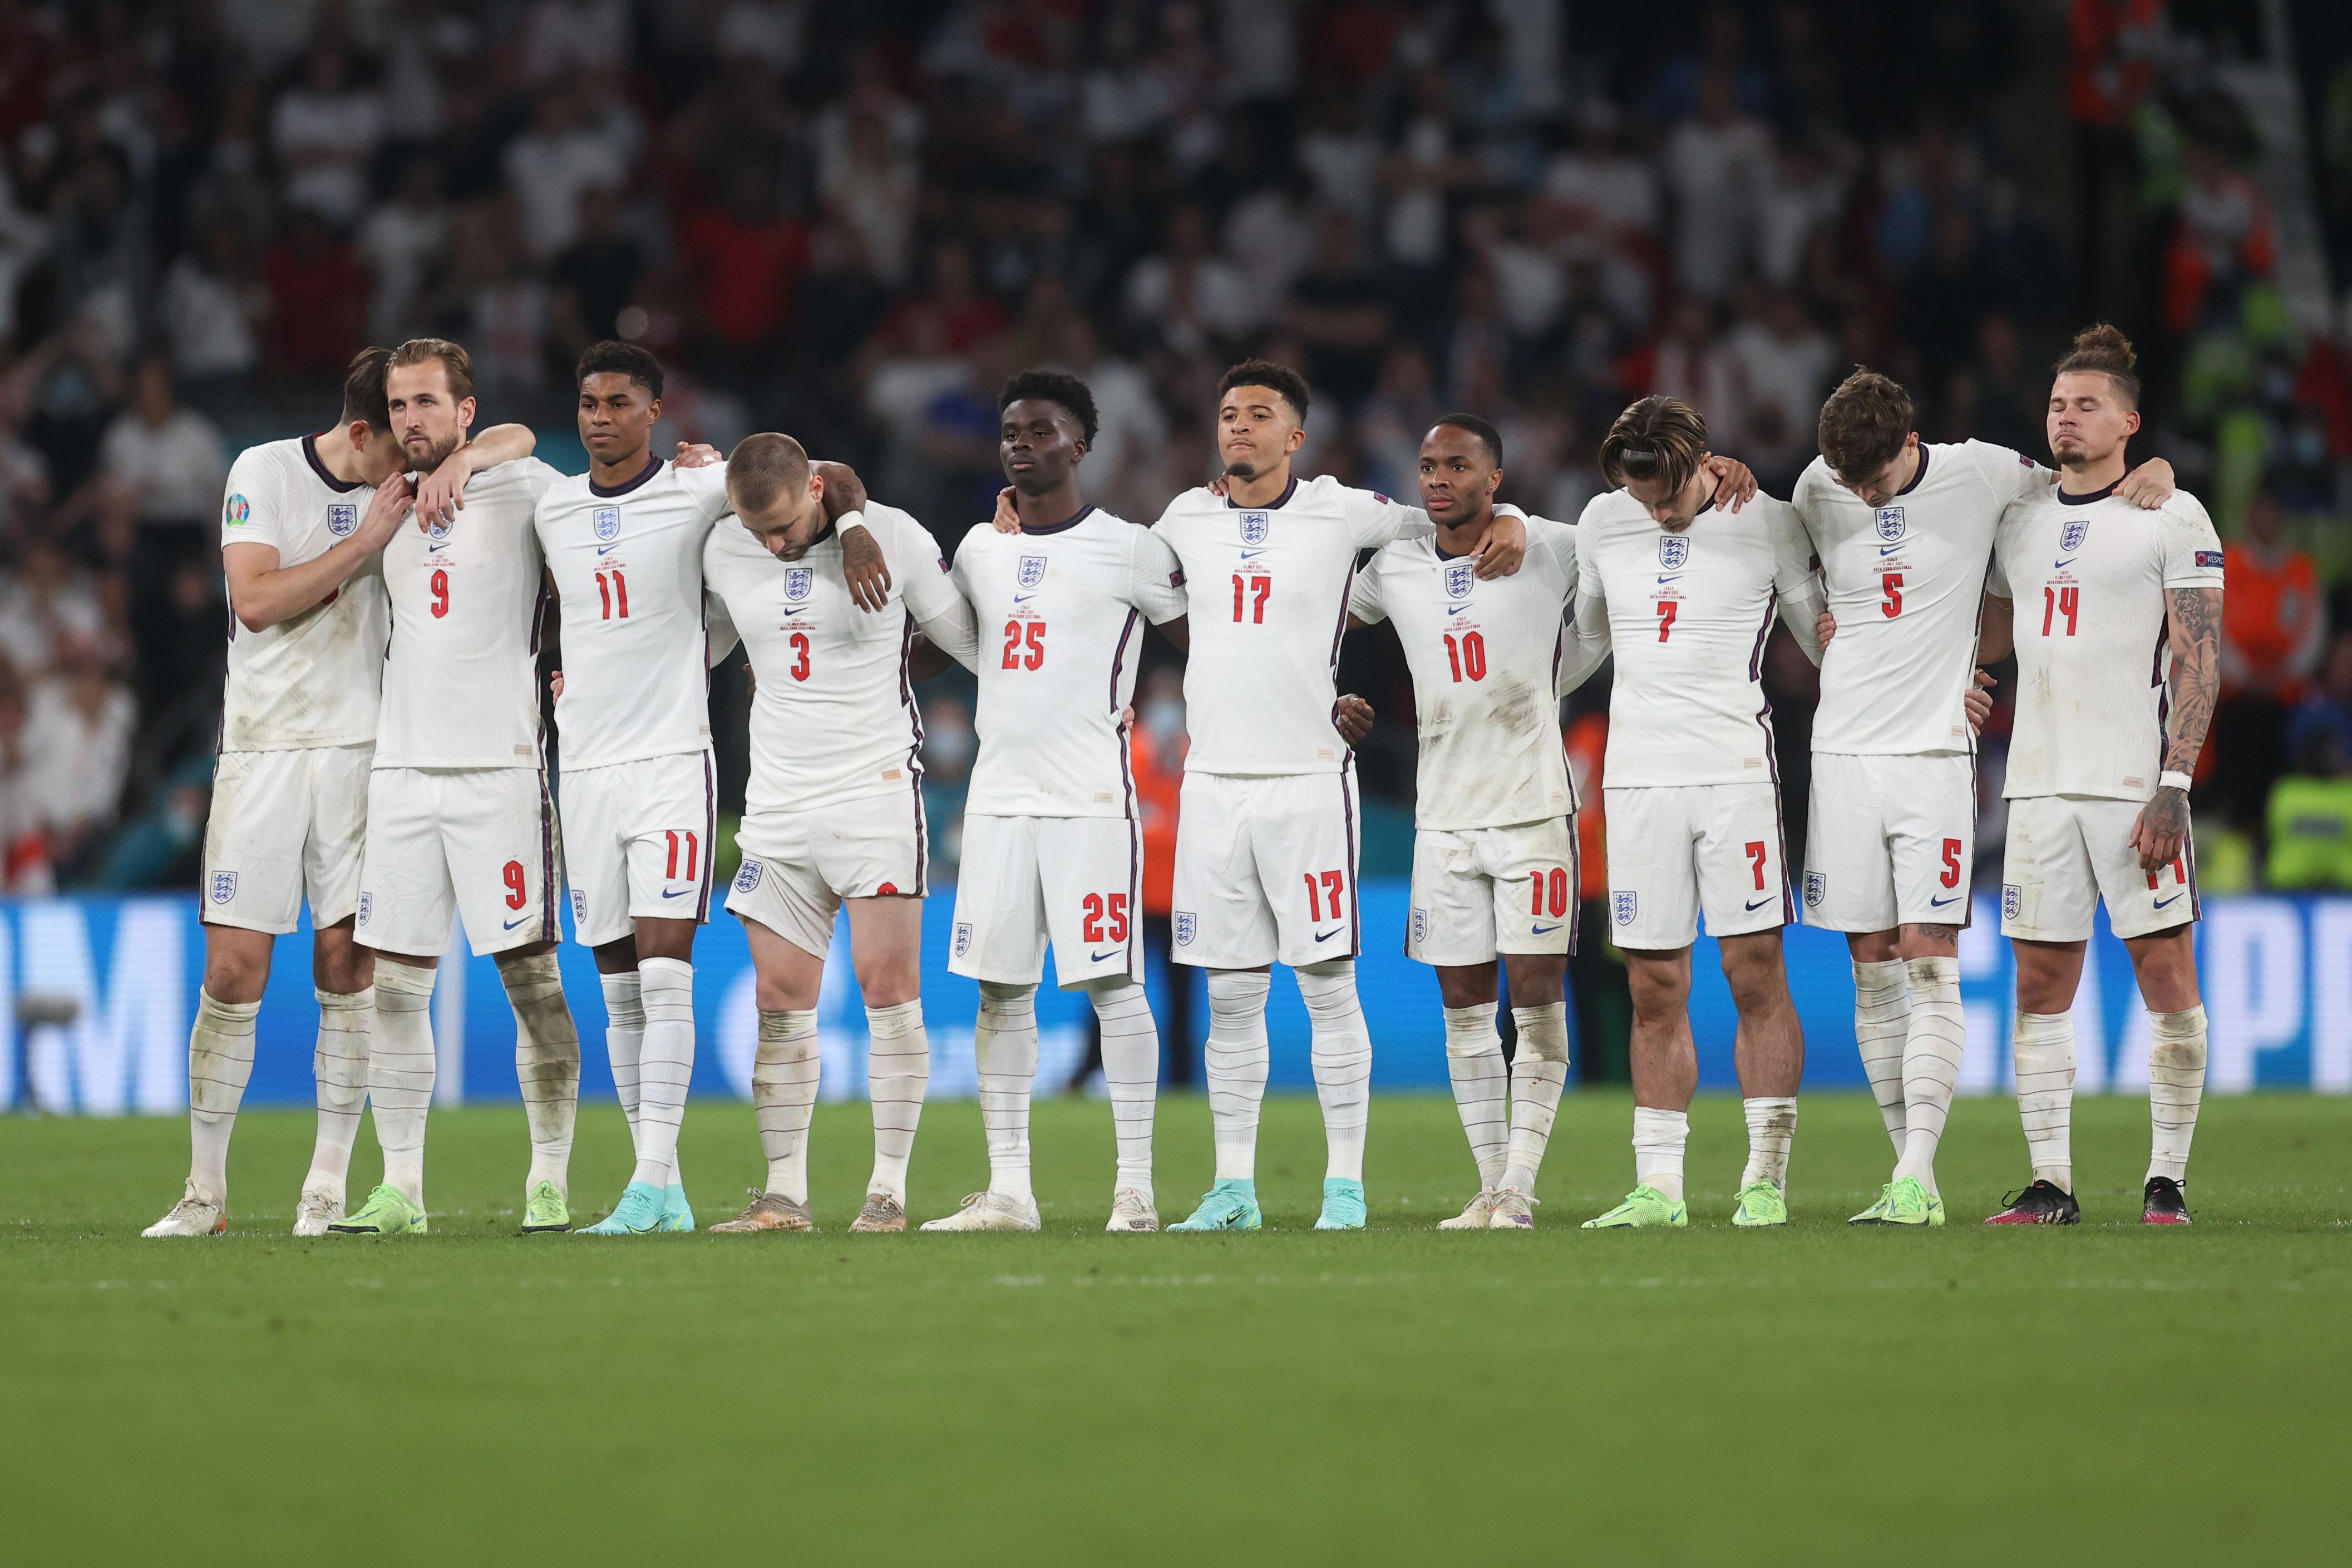 Players of England look dejected in a penalty shoot out during the UEFA Euro 2020 